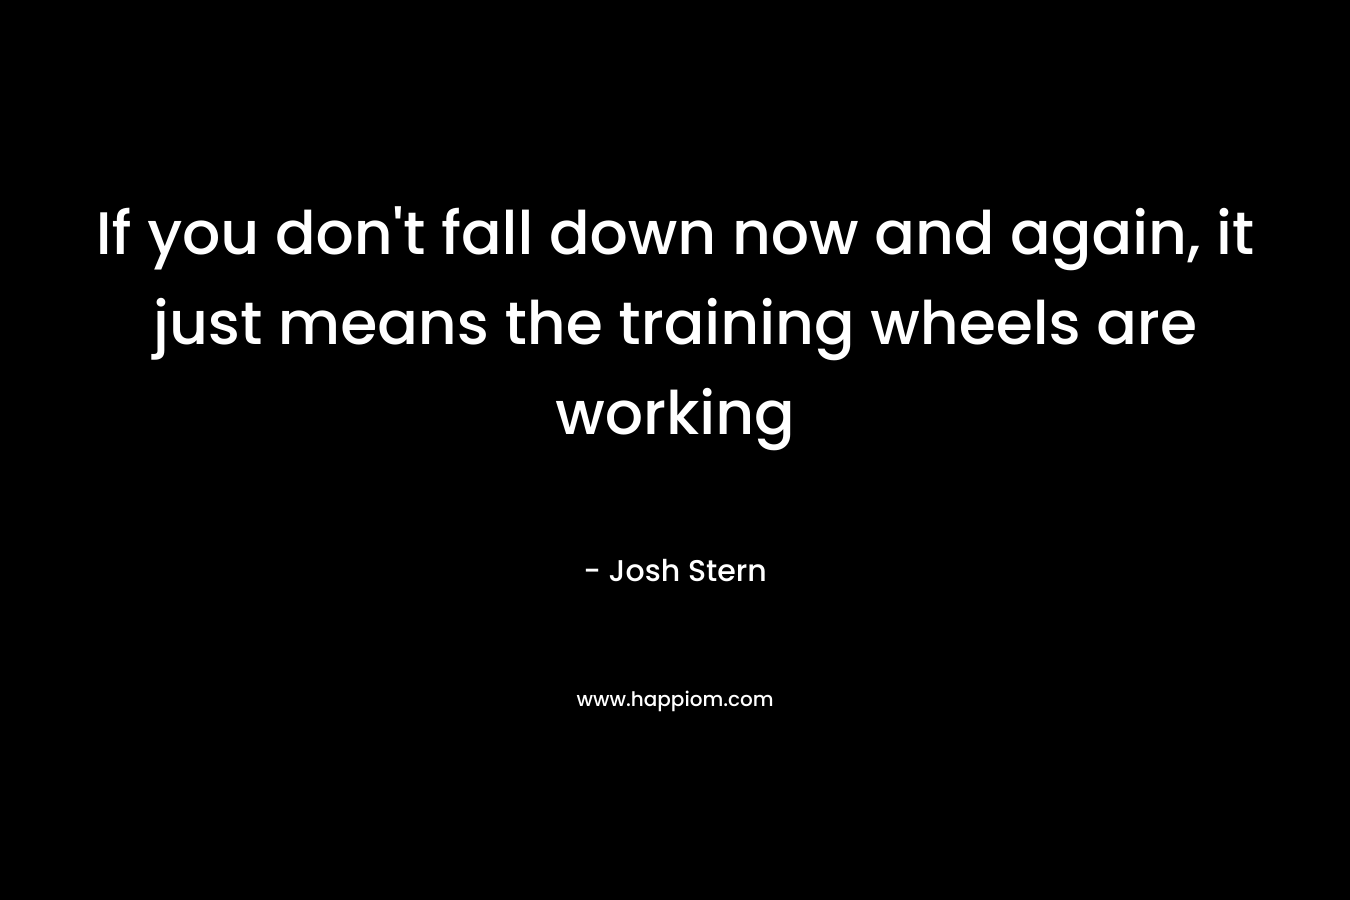 If you don’t fall down now and again, it just means the training wheels are working – Josh Stern